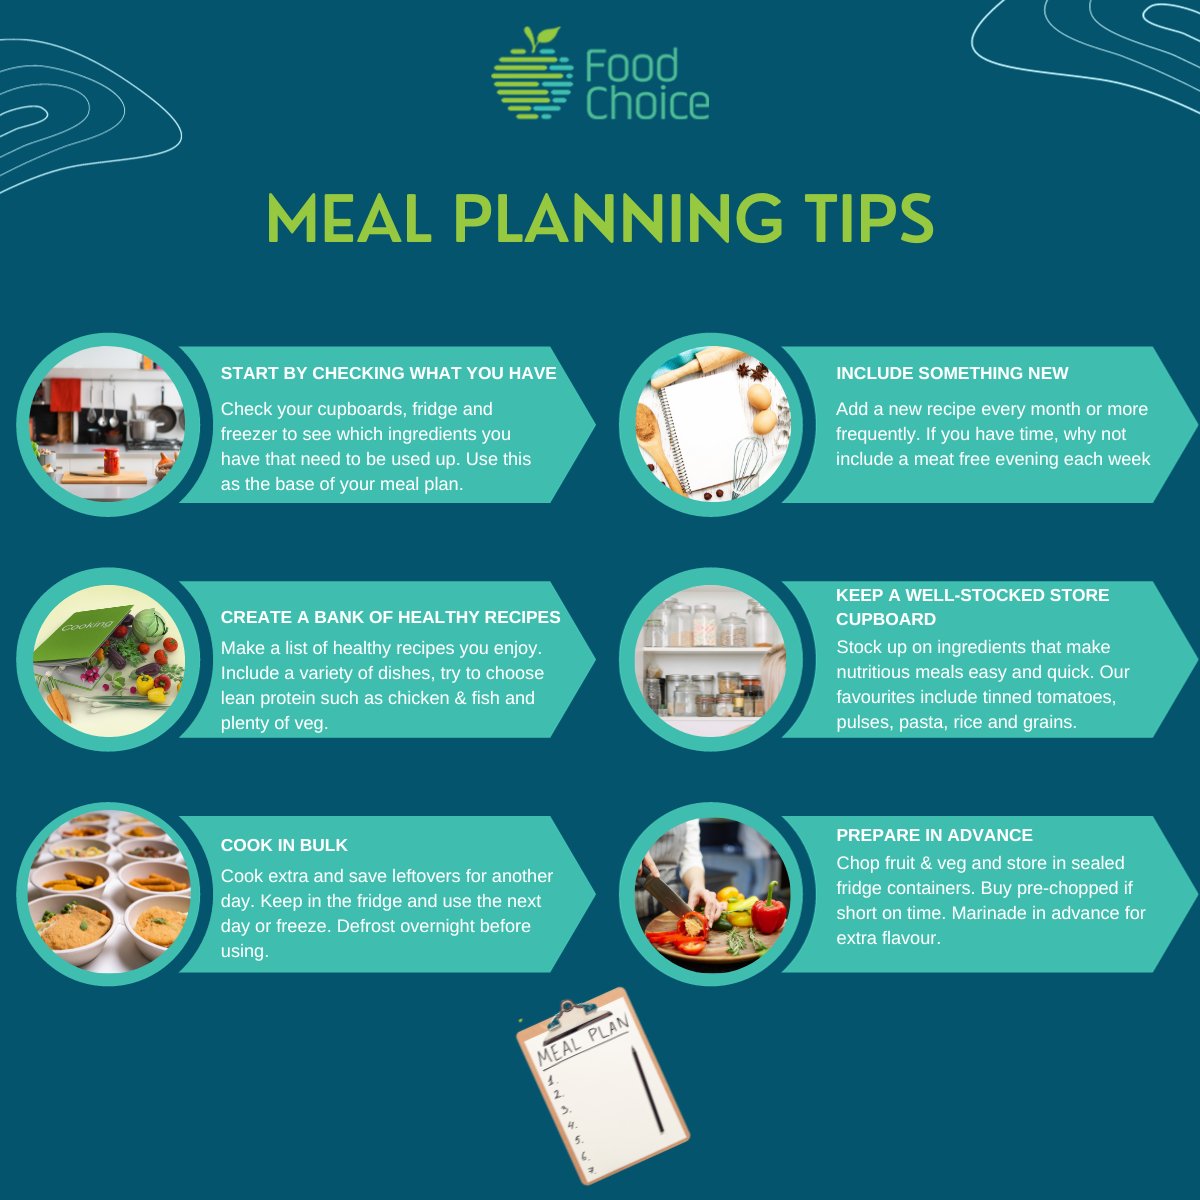 Healthy and delicious meals are vital for feeling your best! Meal planning is a great way to ensure that most of your meals provide good nutrition before, during and after your shift at work. It also helps us to cut down on food waste. Check out our six tips for meal planning!